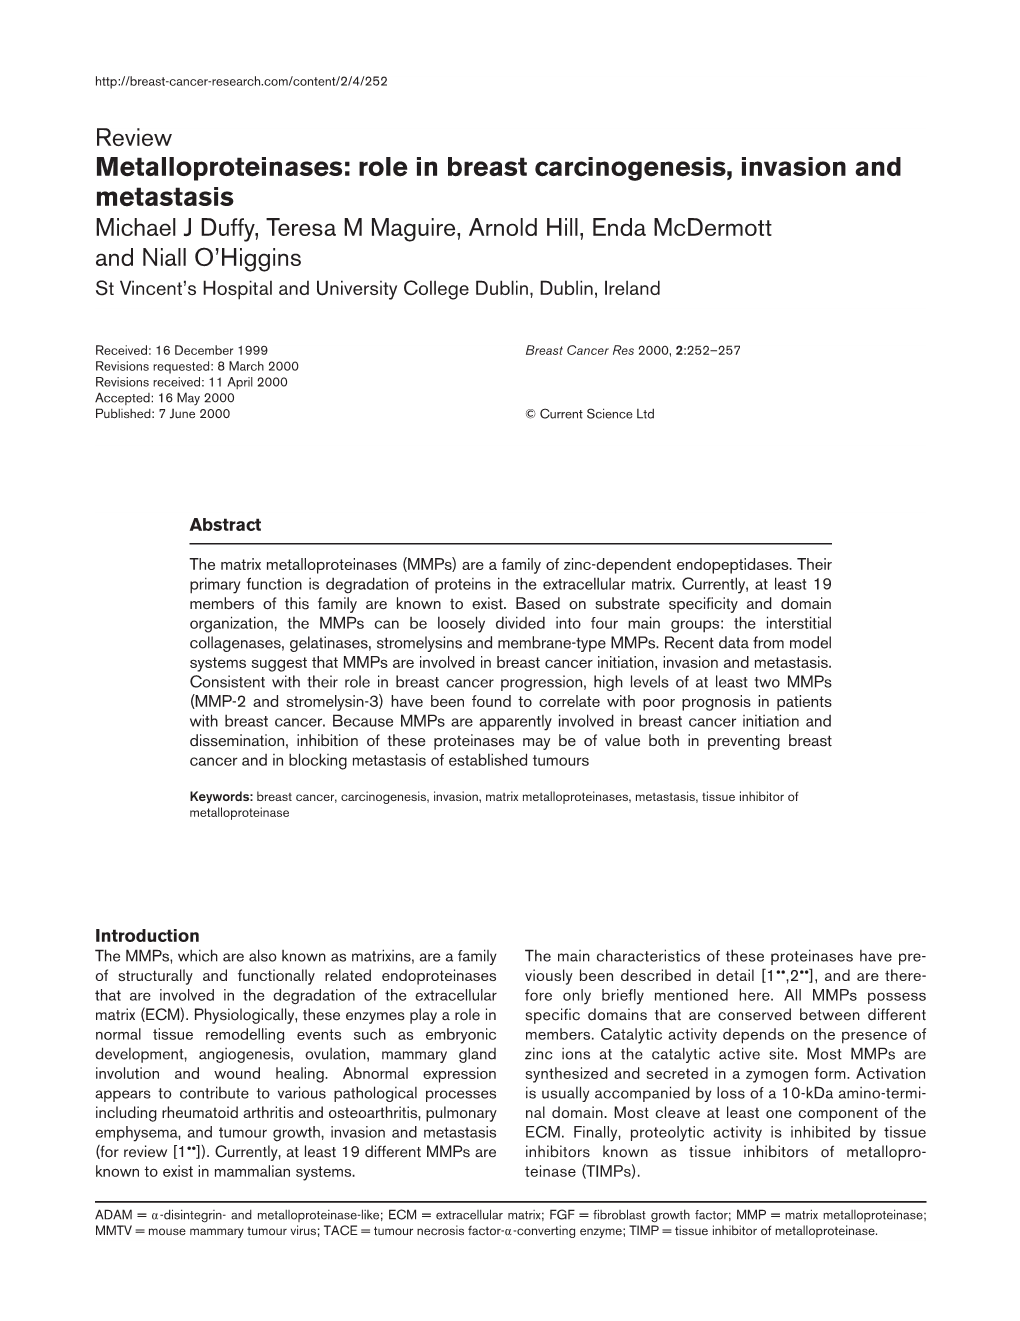 Metalloproteinases: Role in Breast Carcinogenesis, Invasion And